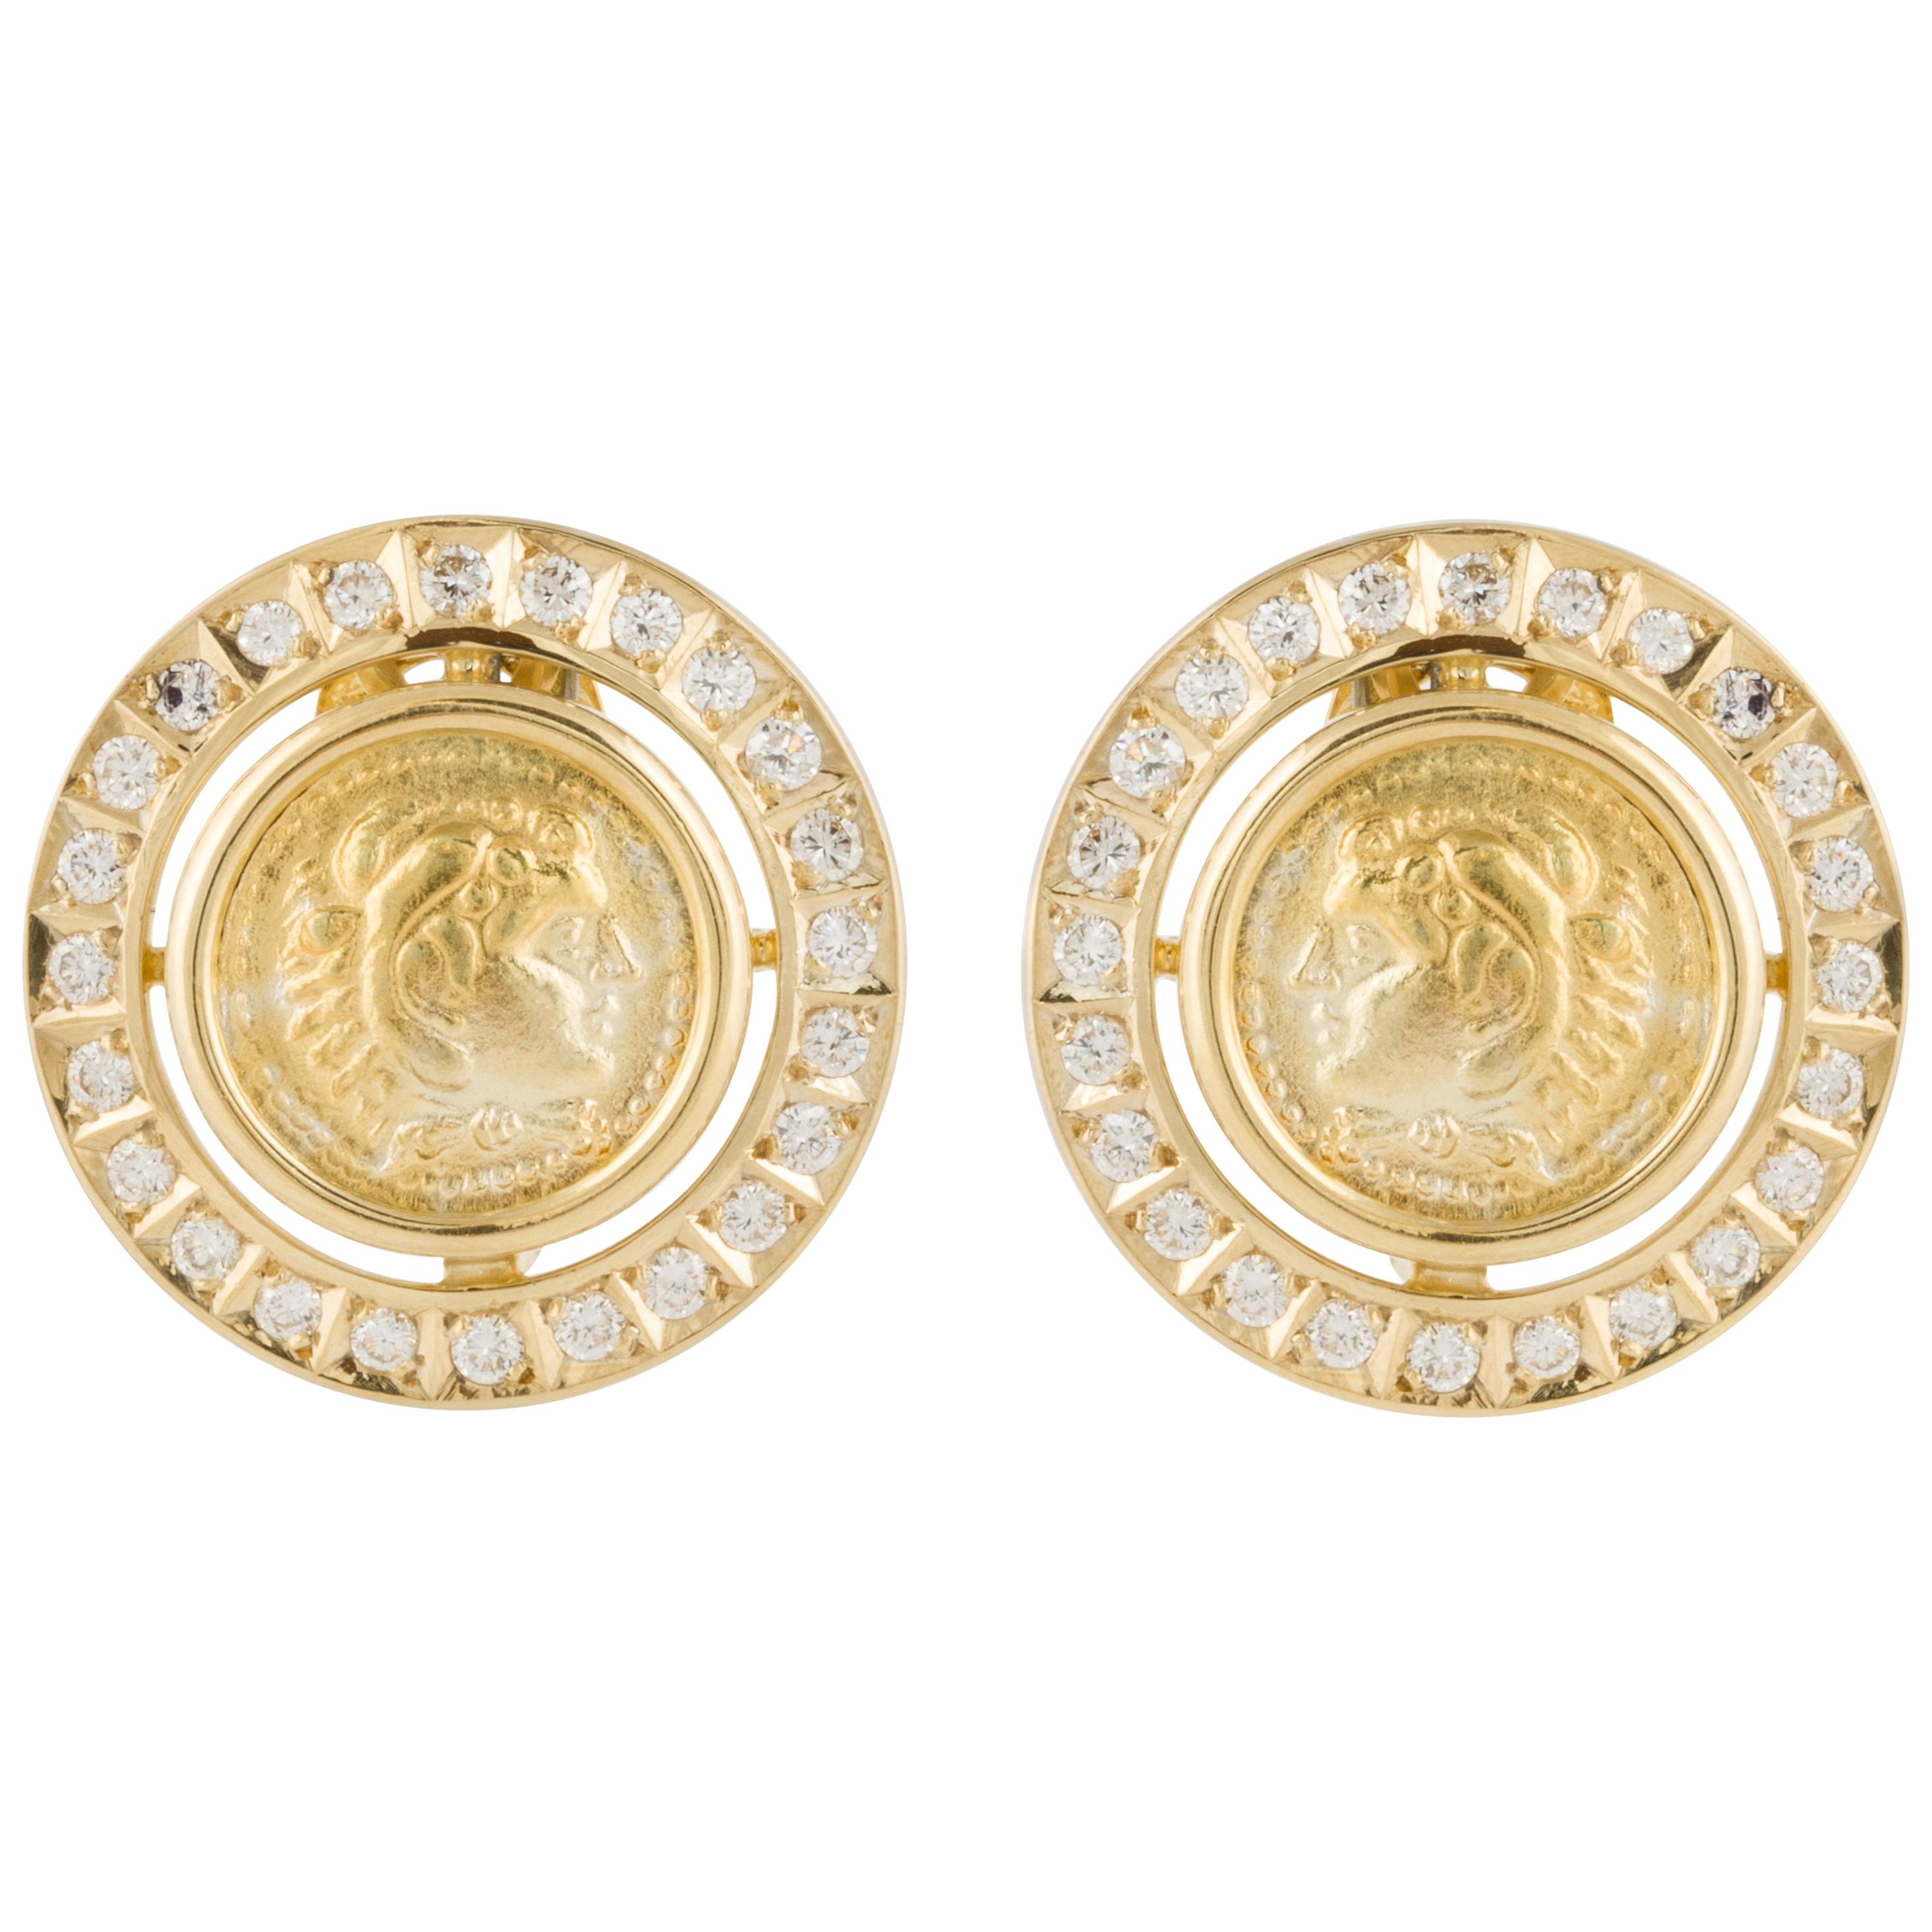 18K Gold Coin Earrings with Diamonds